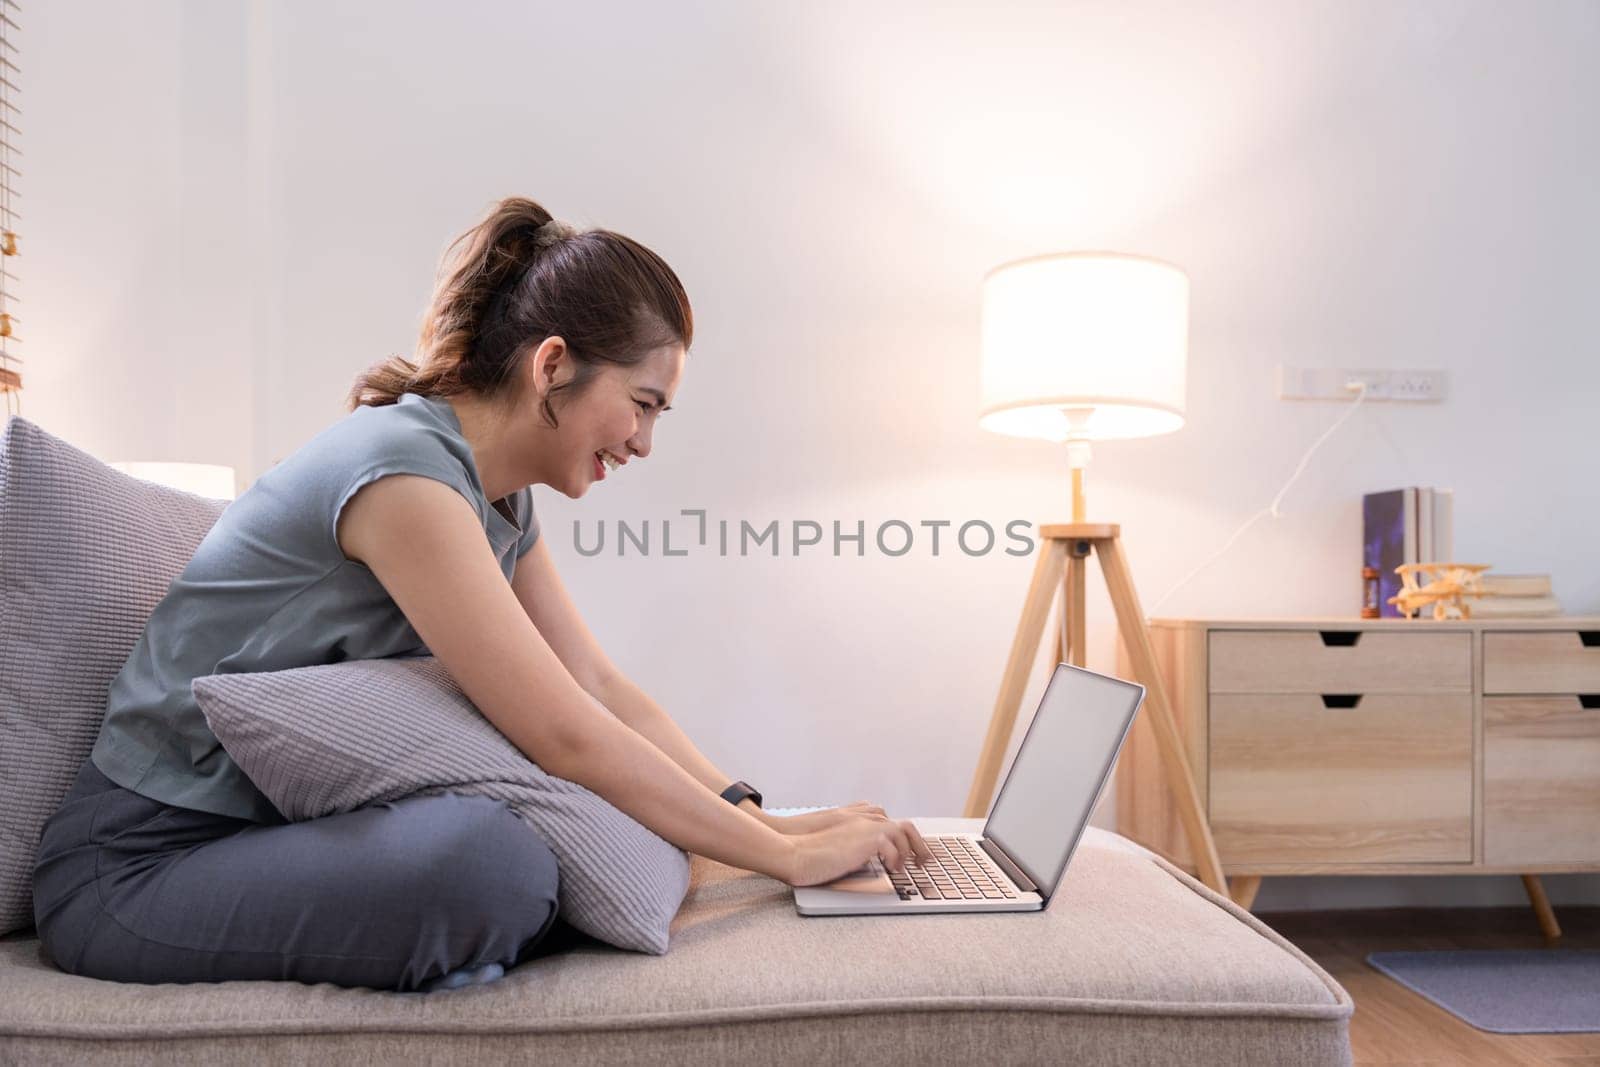 Young woman asian using laptop pc computer on couch relax surfing the net at home.